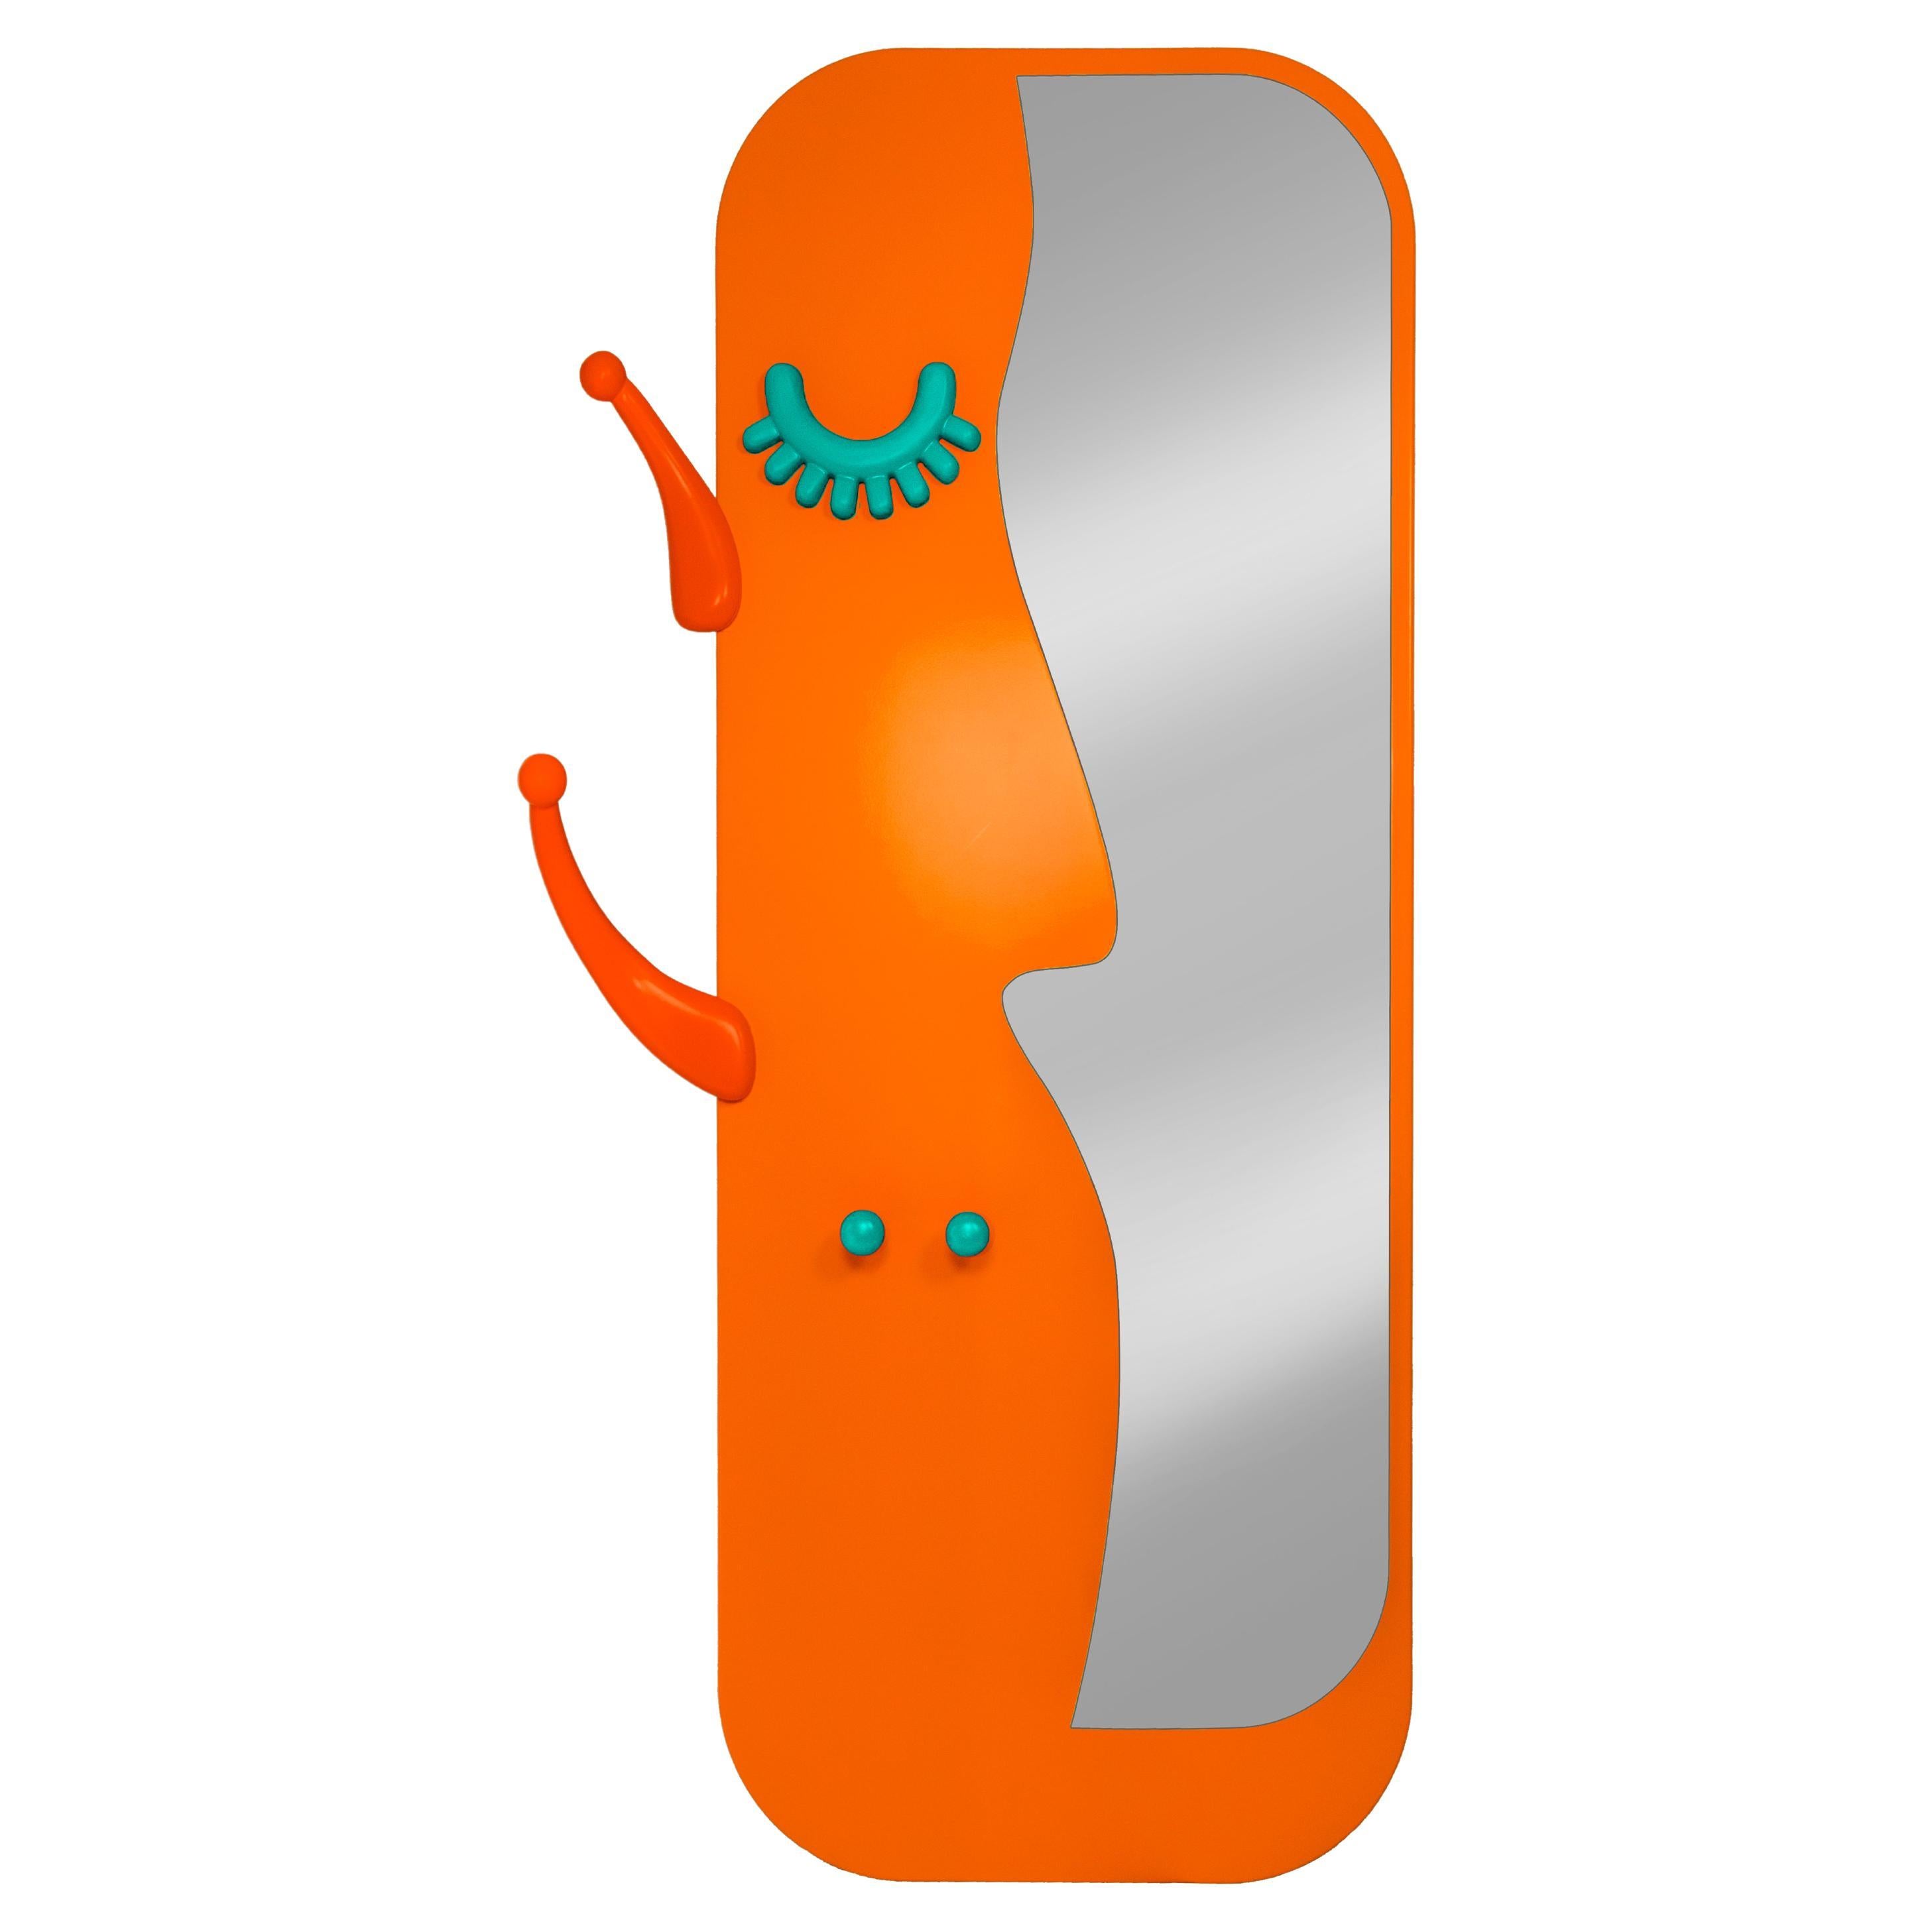 Face to Face Wall Mirror: Lively Orange Dressing Mirror with Hanger For Sale